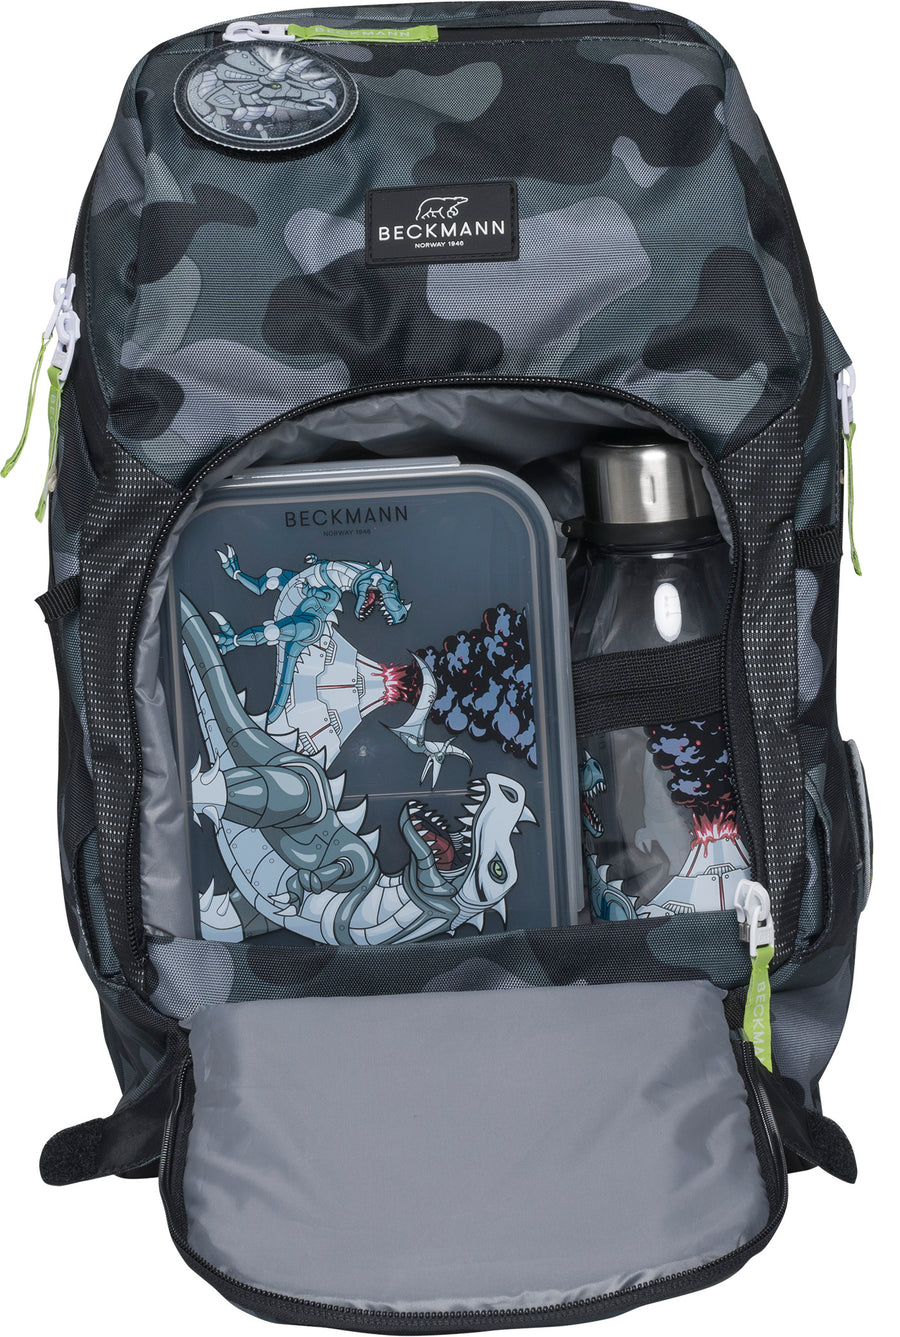 Best Kids Backpack New Zealand Cameo Print With extra storage